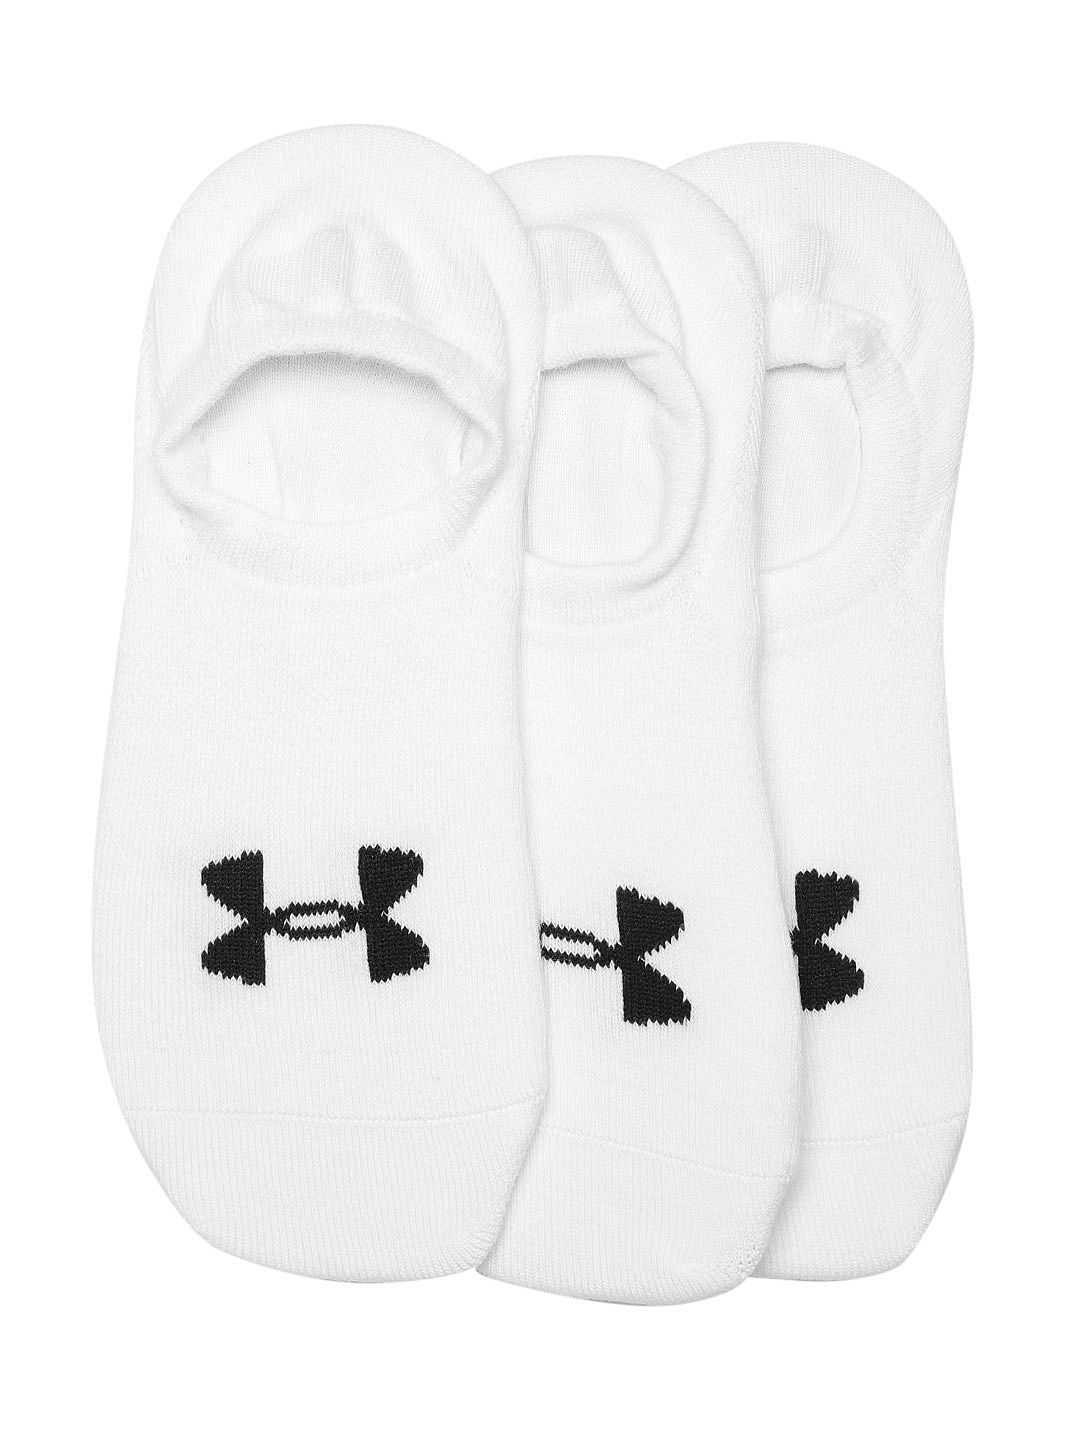 UNDER ARMOUR Unisex Pack of 3 White & Black Brand Logo Print Shoe Liners Price in India